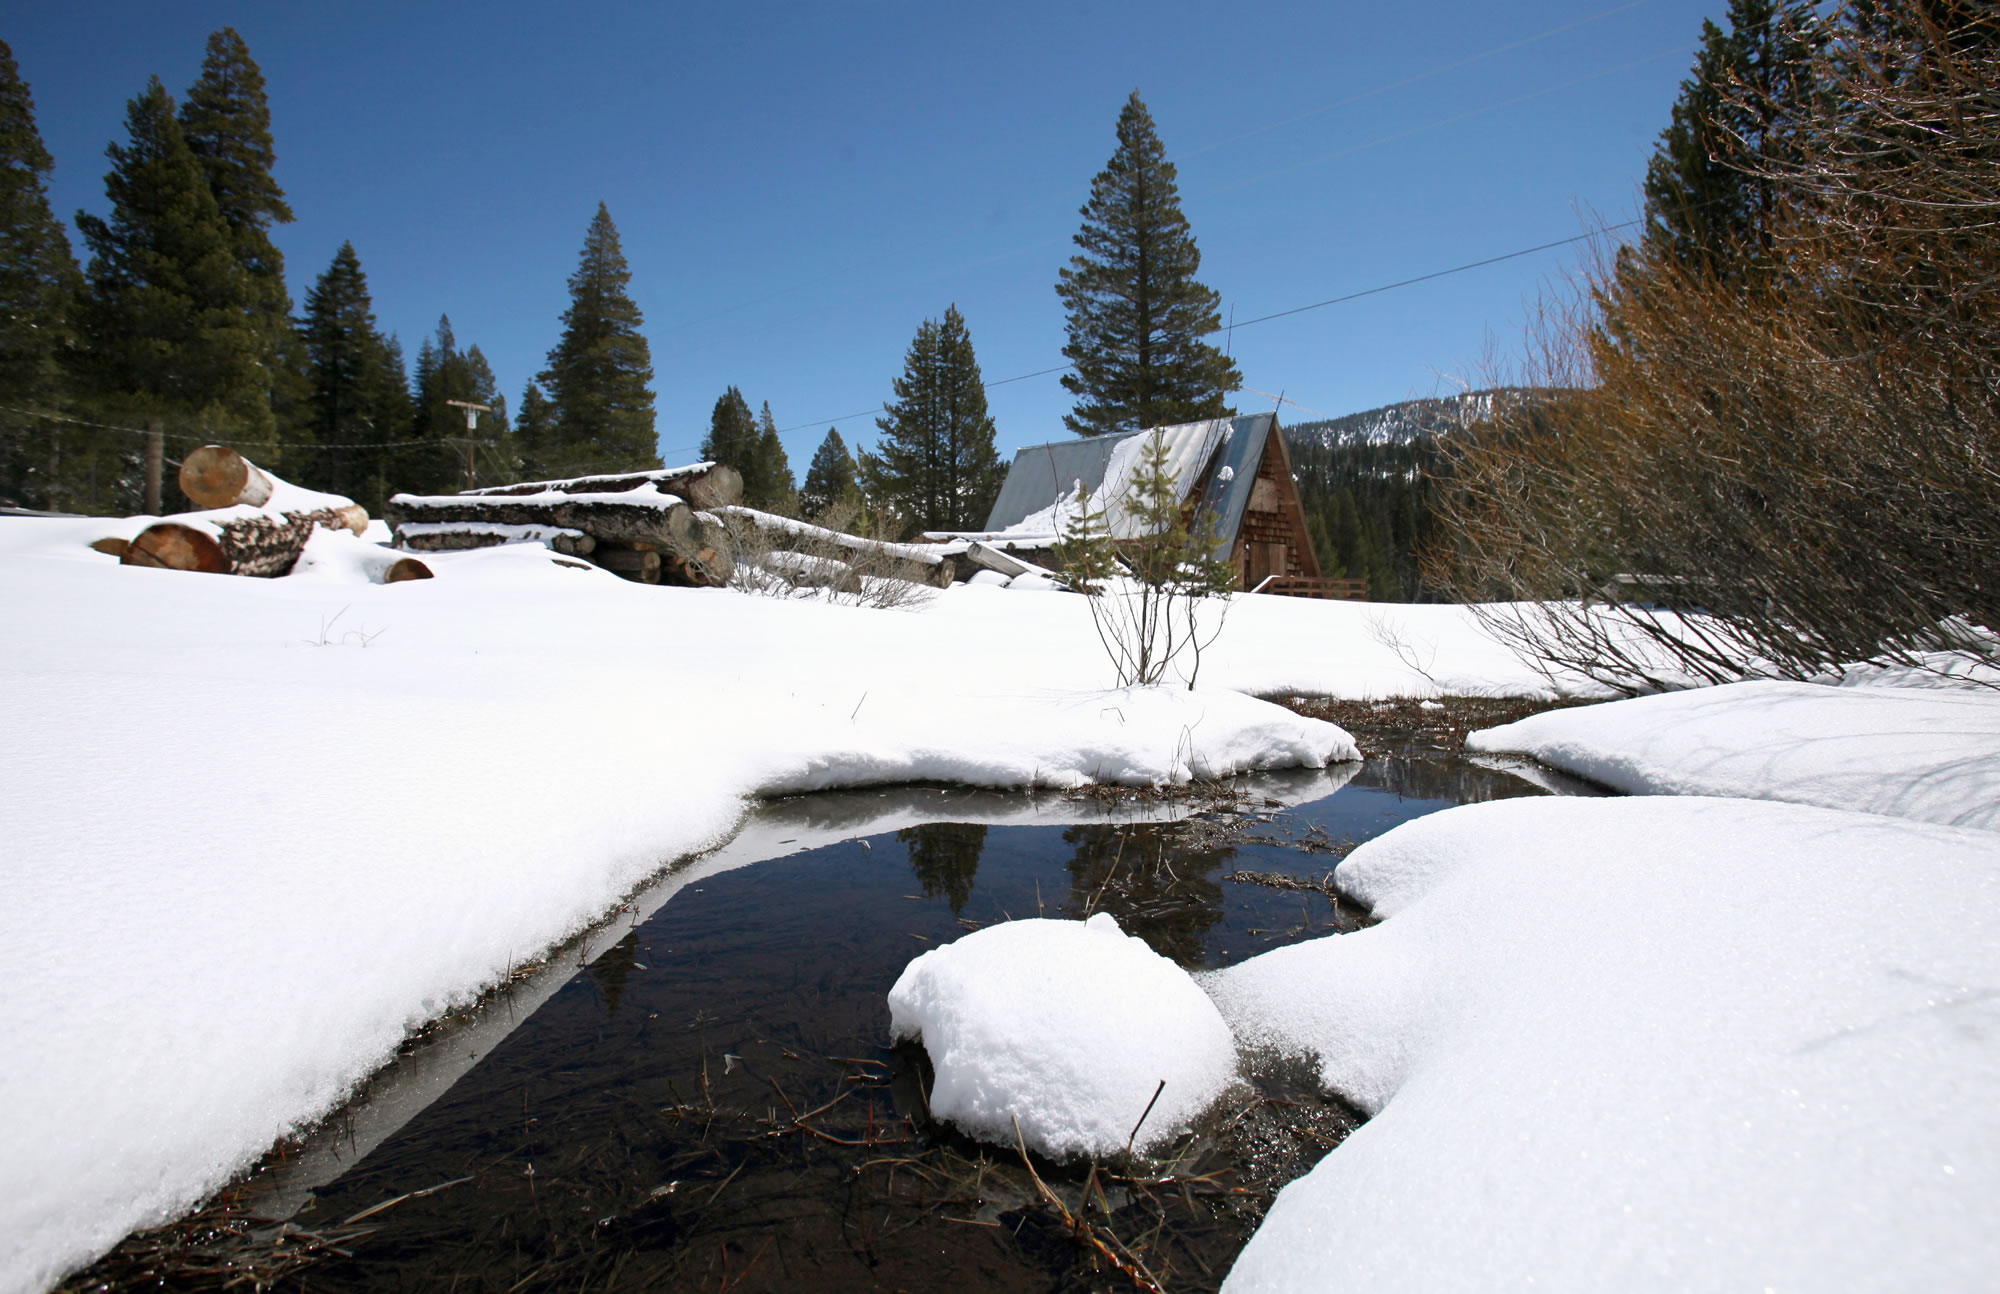 A stream seen running through snow covered banks near the site of the Department of Water Resources snow survey at Echo Summit, Calif. on April 30,2010. A new report released Thursday found climate change is affecting California.